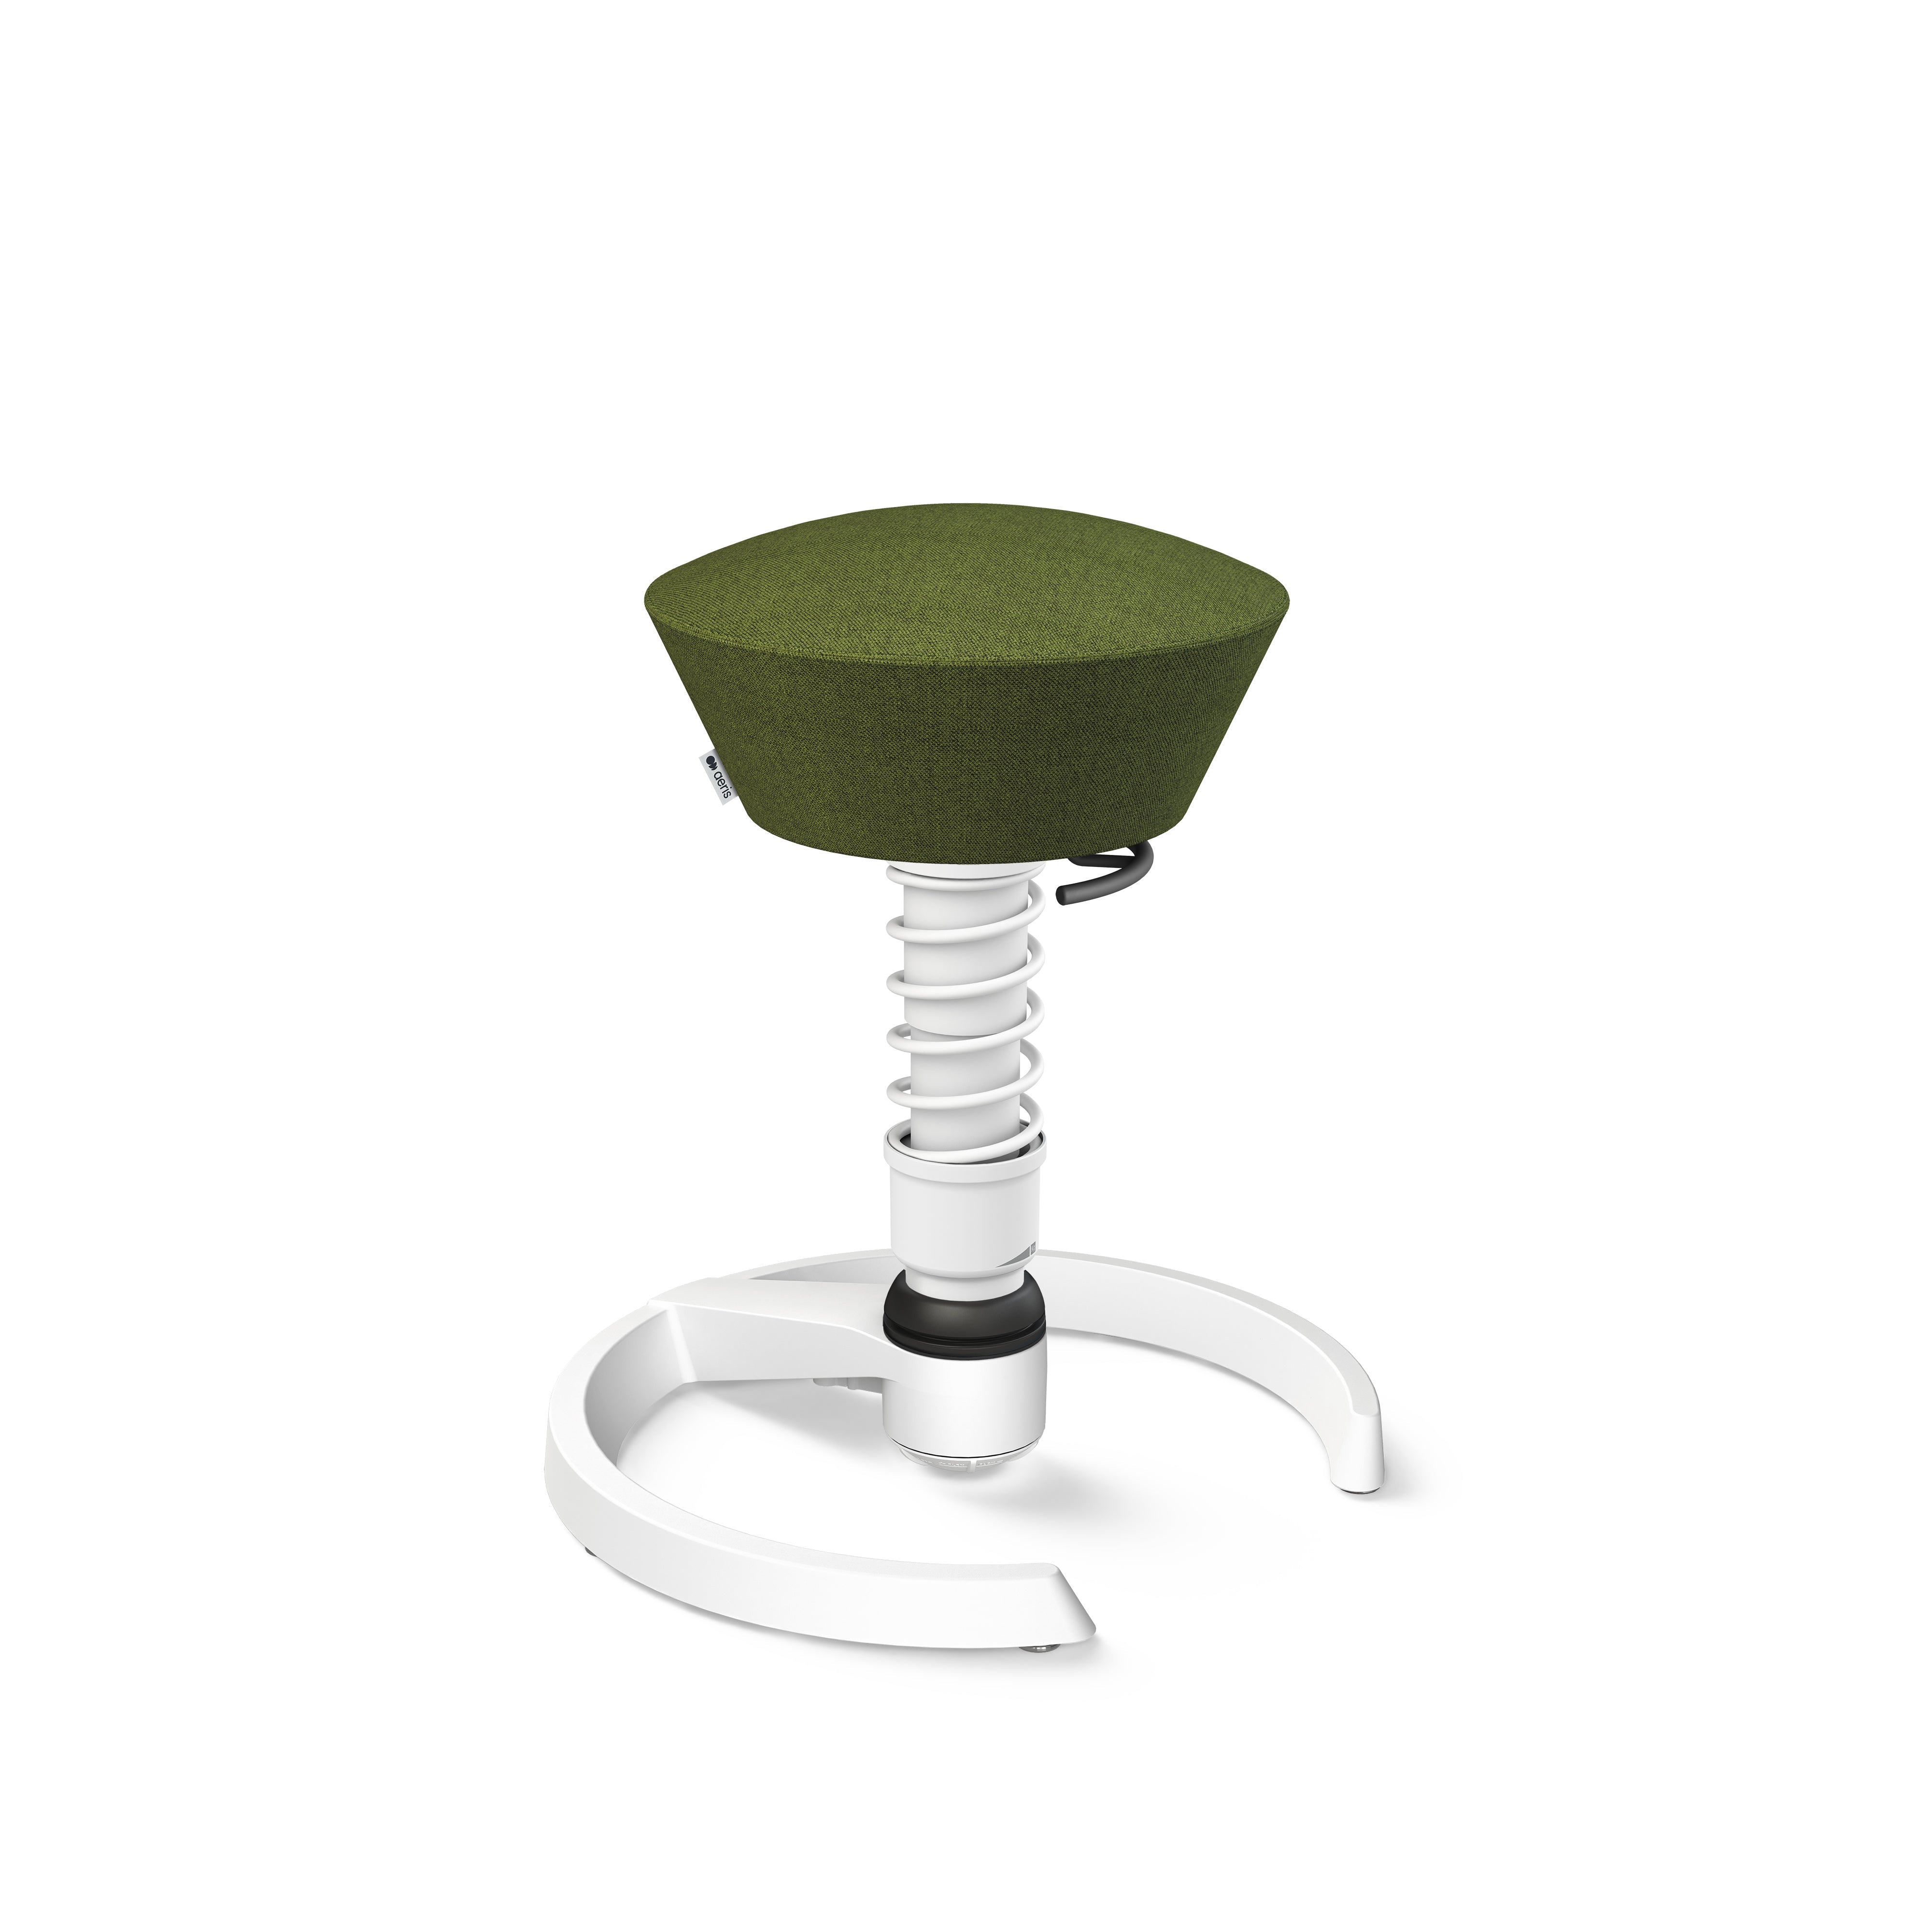 Aeris Swopper office stool with green seat and matching spring, white frame.